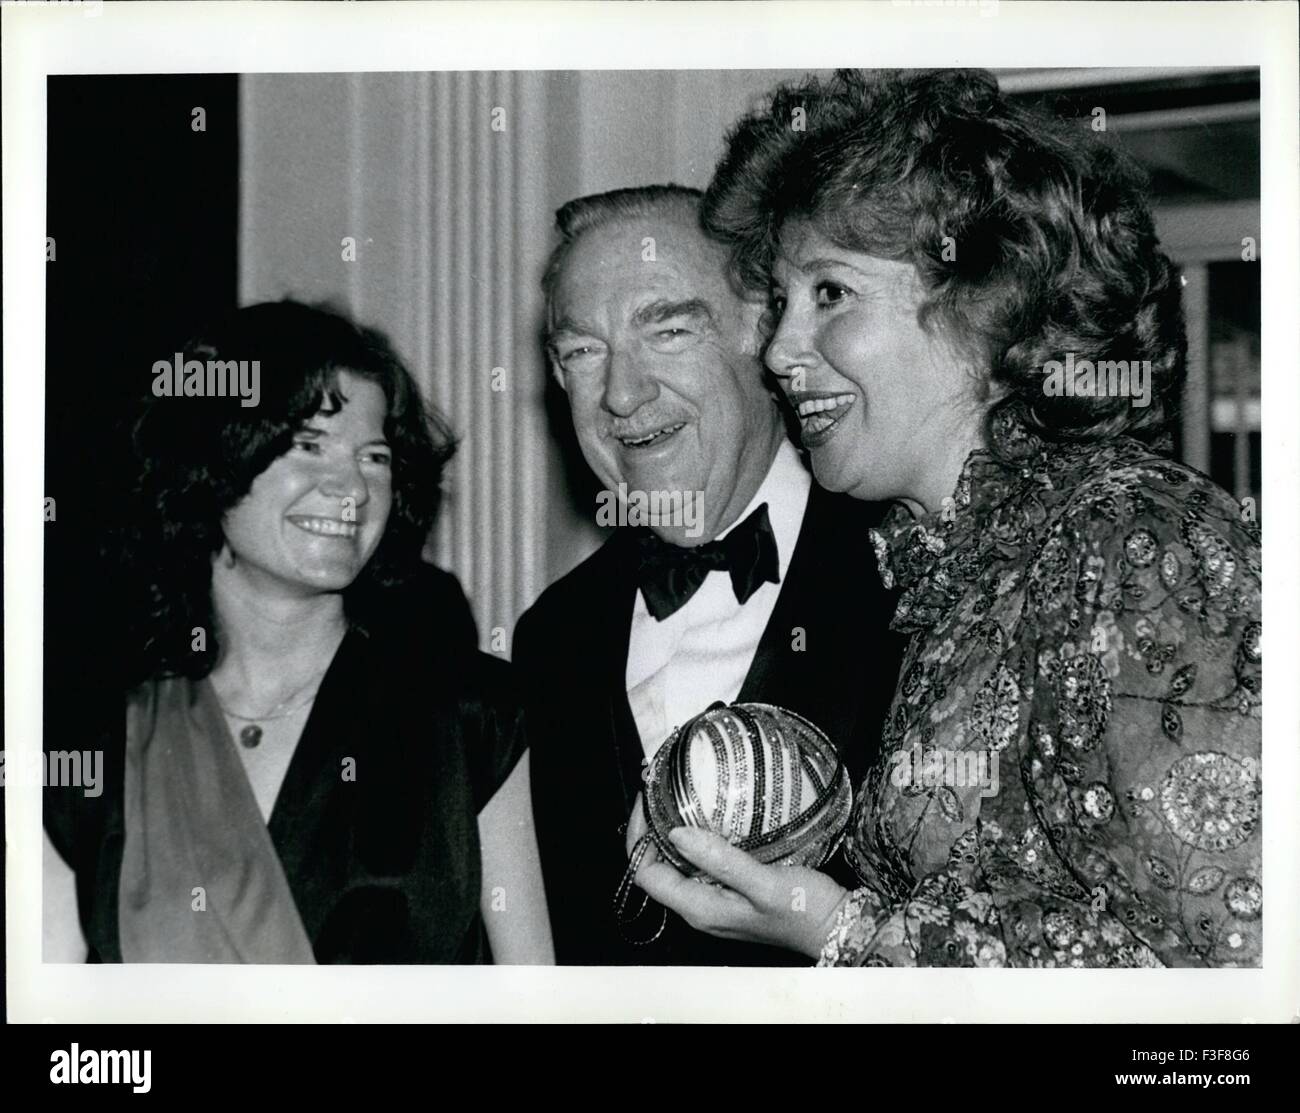 Waldorf. 18th Feb, 1981. Astoria The Scientists' Institue for Public Information hold a dinner-dance honoring CBS newsman Walter Cronkite. Left to Right are; Dr. Sally Ride, Astronaut(NASA Space Program), Walter Cronkite, CBS Newsman, and Beverly Sills, opera star and Mistress of Ceremonies. © Keystone Pictures USA/ZUMAPRESS.com/Alamy Live News Stock Photo